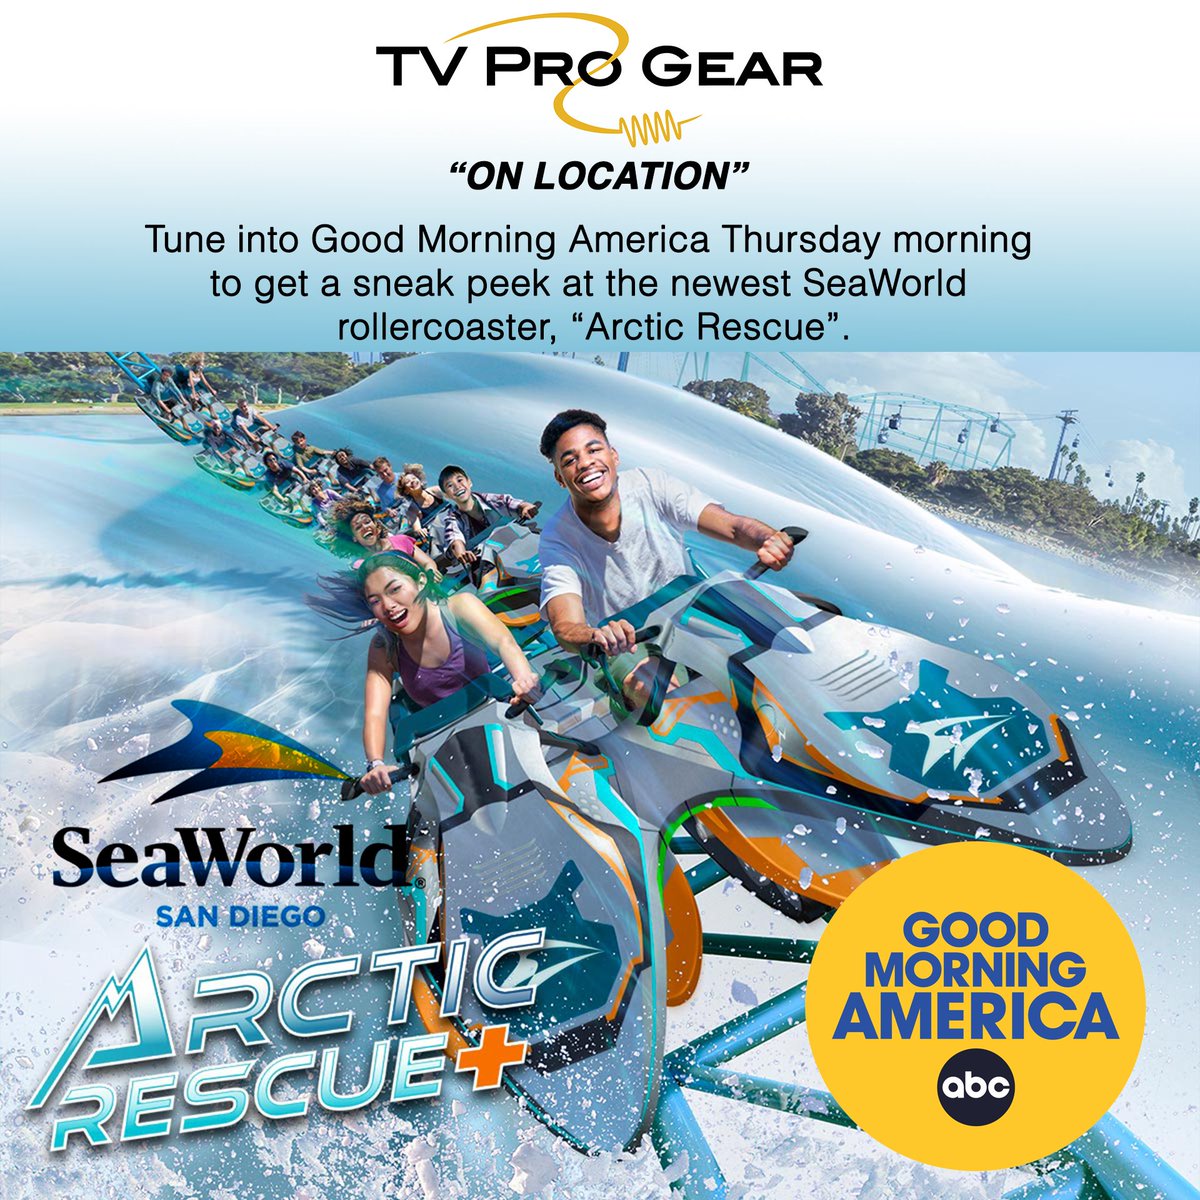 Tune in to Good Morning America tomorrow morning June 1st at 7:00 am. The TV Pro Gear team will be filming the premiere of SeaWorld's newest rollercoaster, Arctic Rescue. Set your DVR or watch it live. #TVProGear, #FlyPack, #GoodMorningAmerica